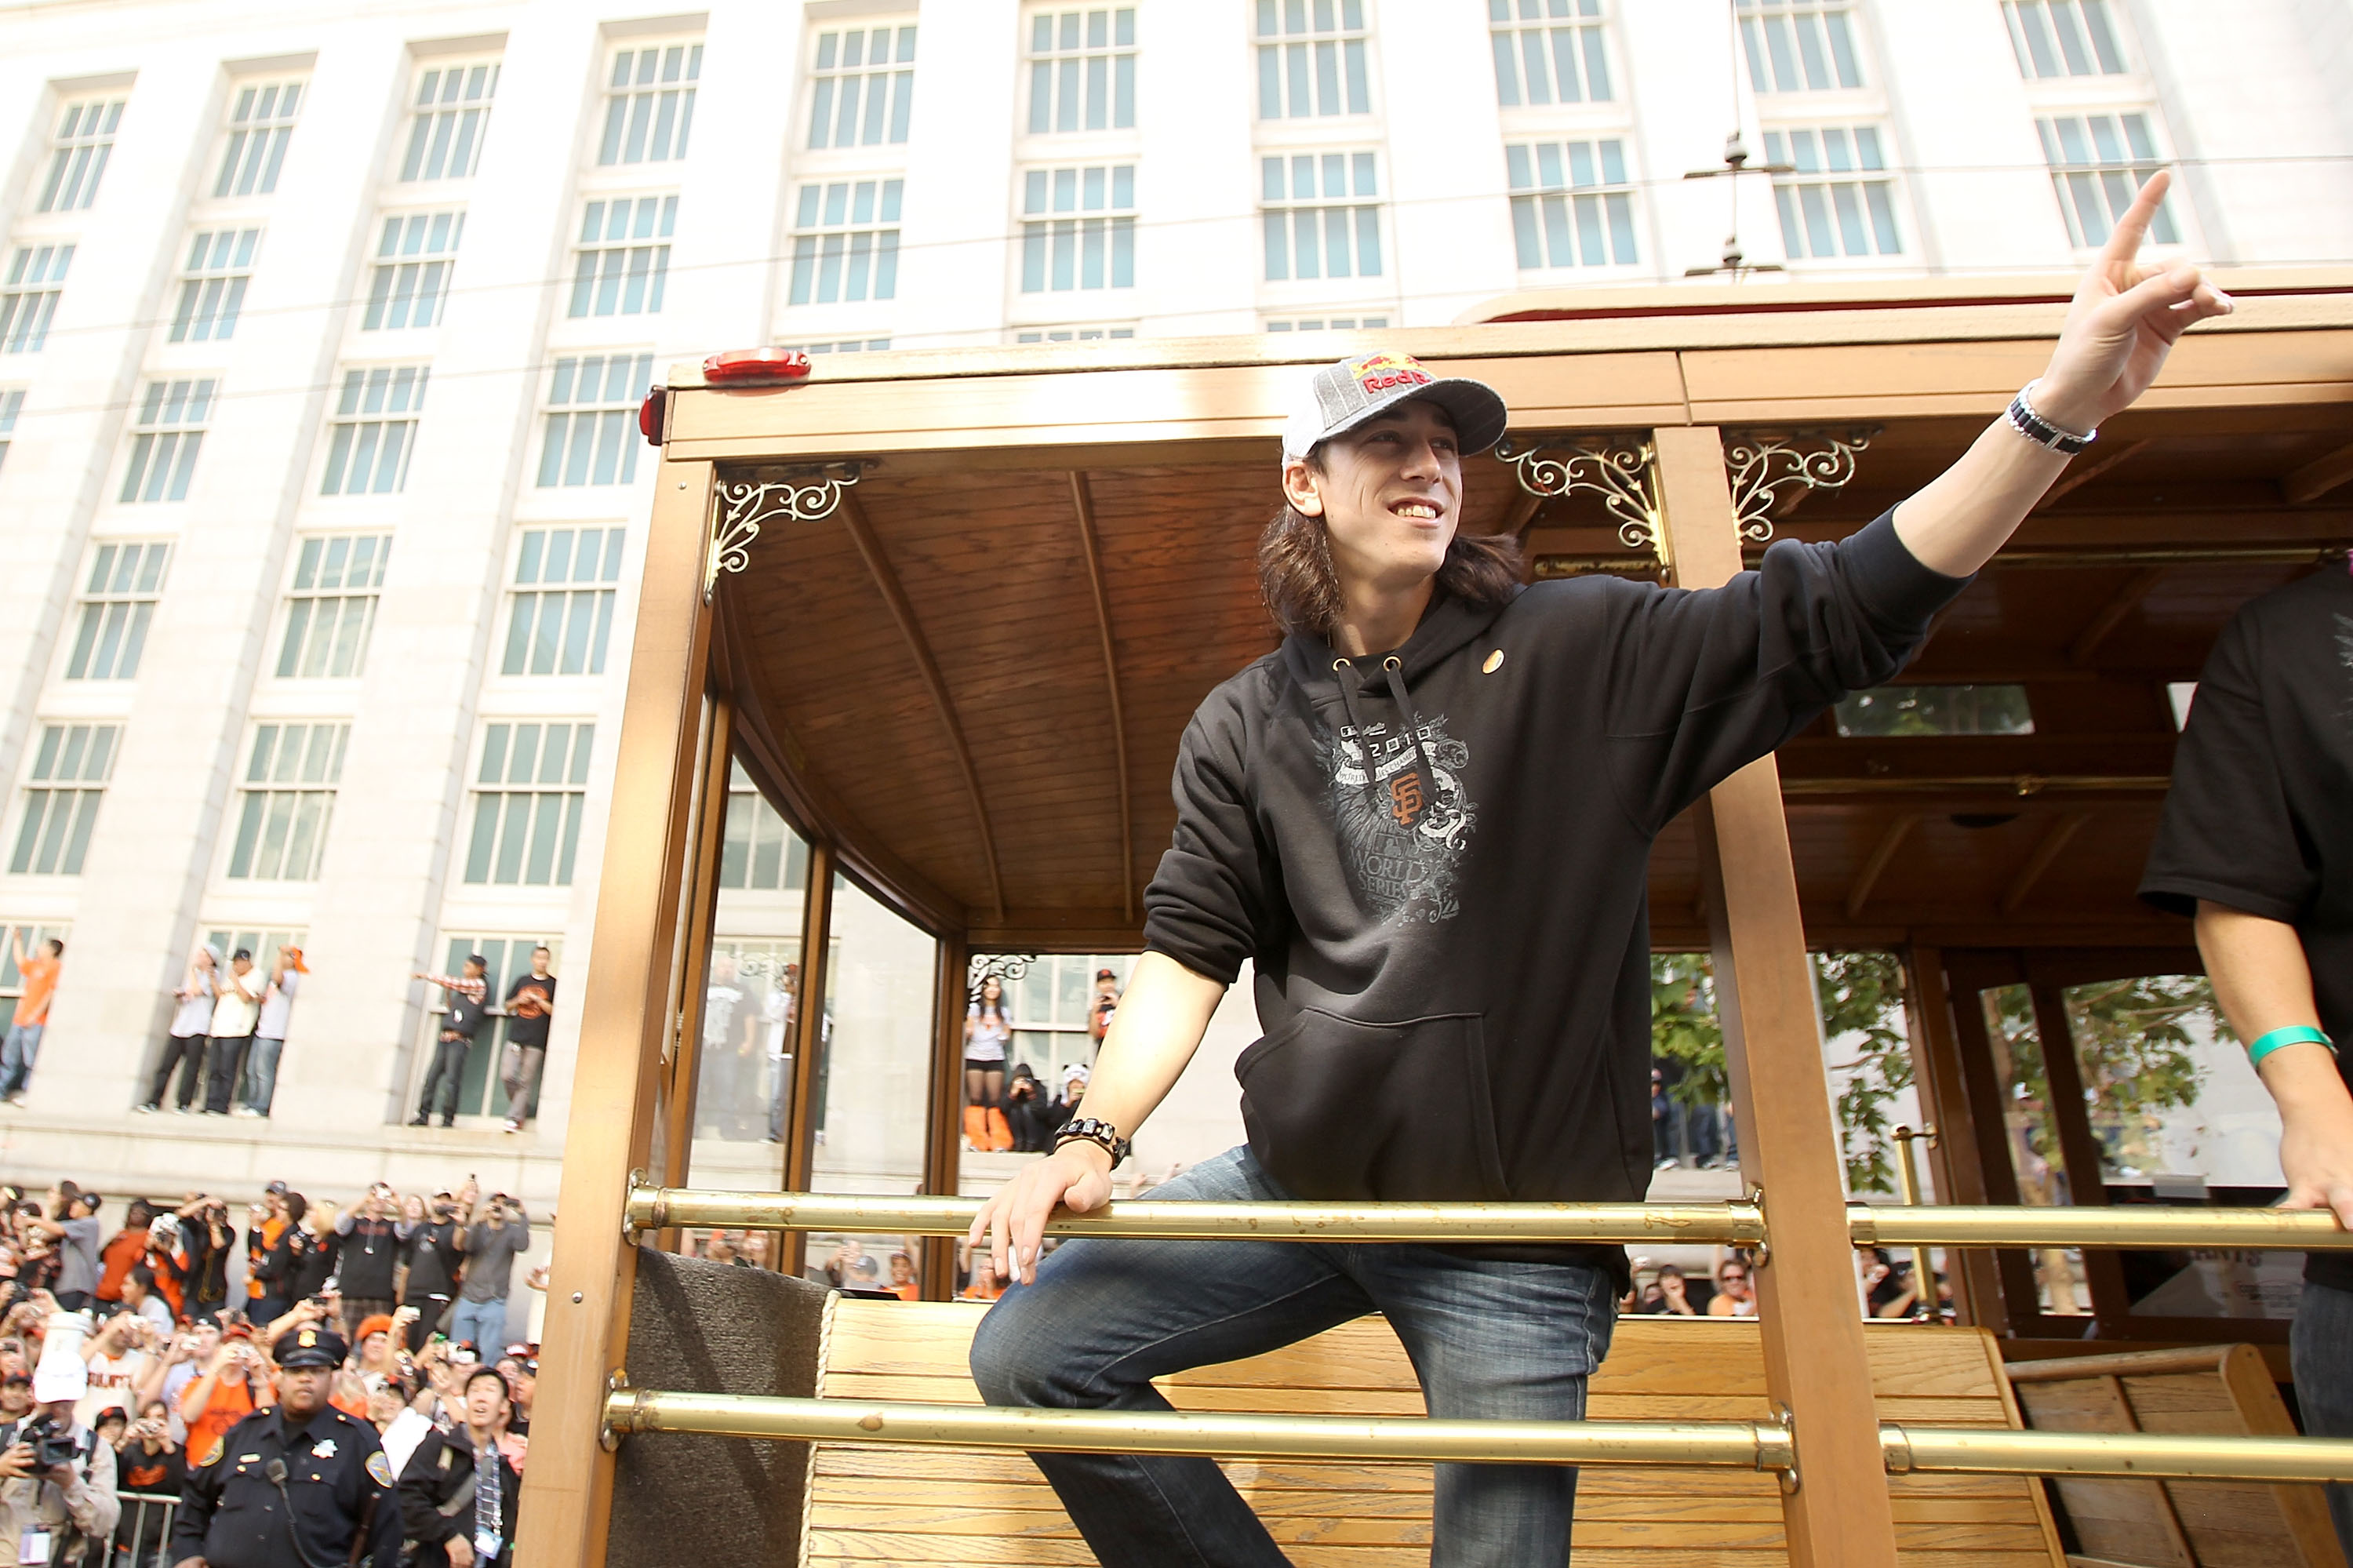 SAN FRANCISCO - NOVEMBER 03:  Tim Lincecum of the San Francisco Giants waves to the crowd during the San Francisco Giants victory parade on November 3, 2010 in San Francisco, California.  (Photo by Ezra Shaw/Getty Images)